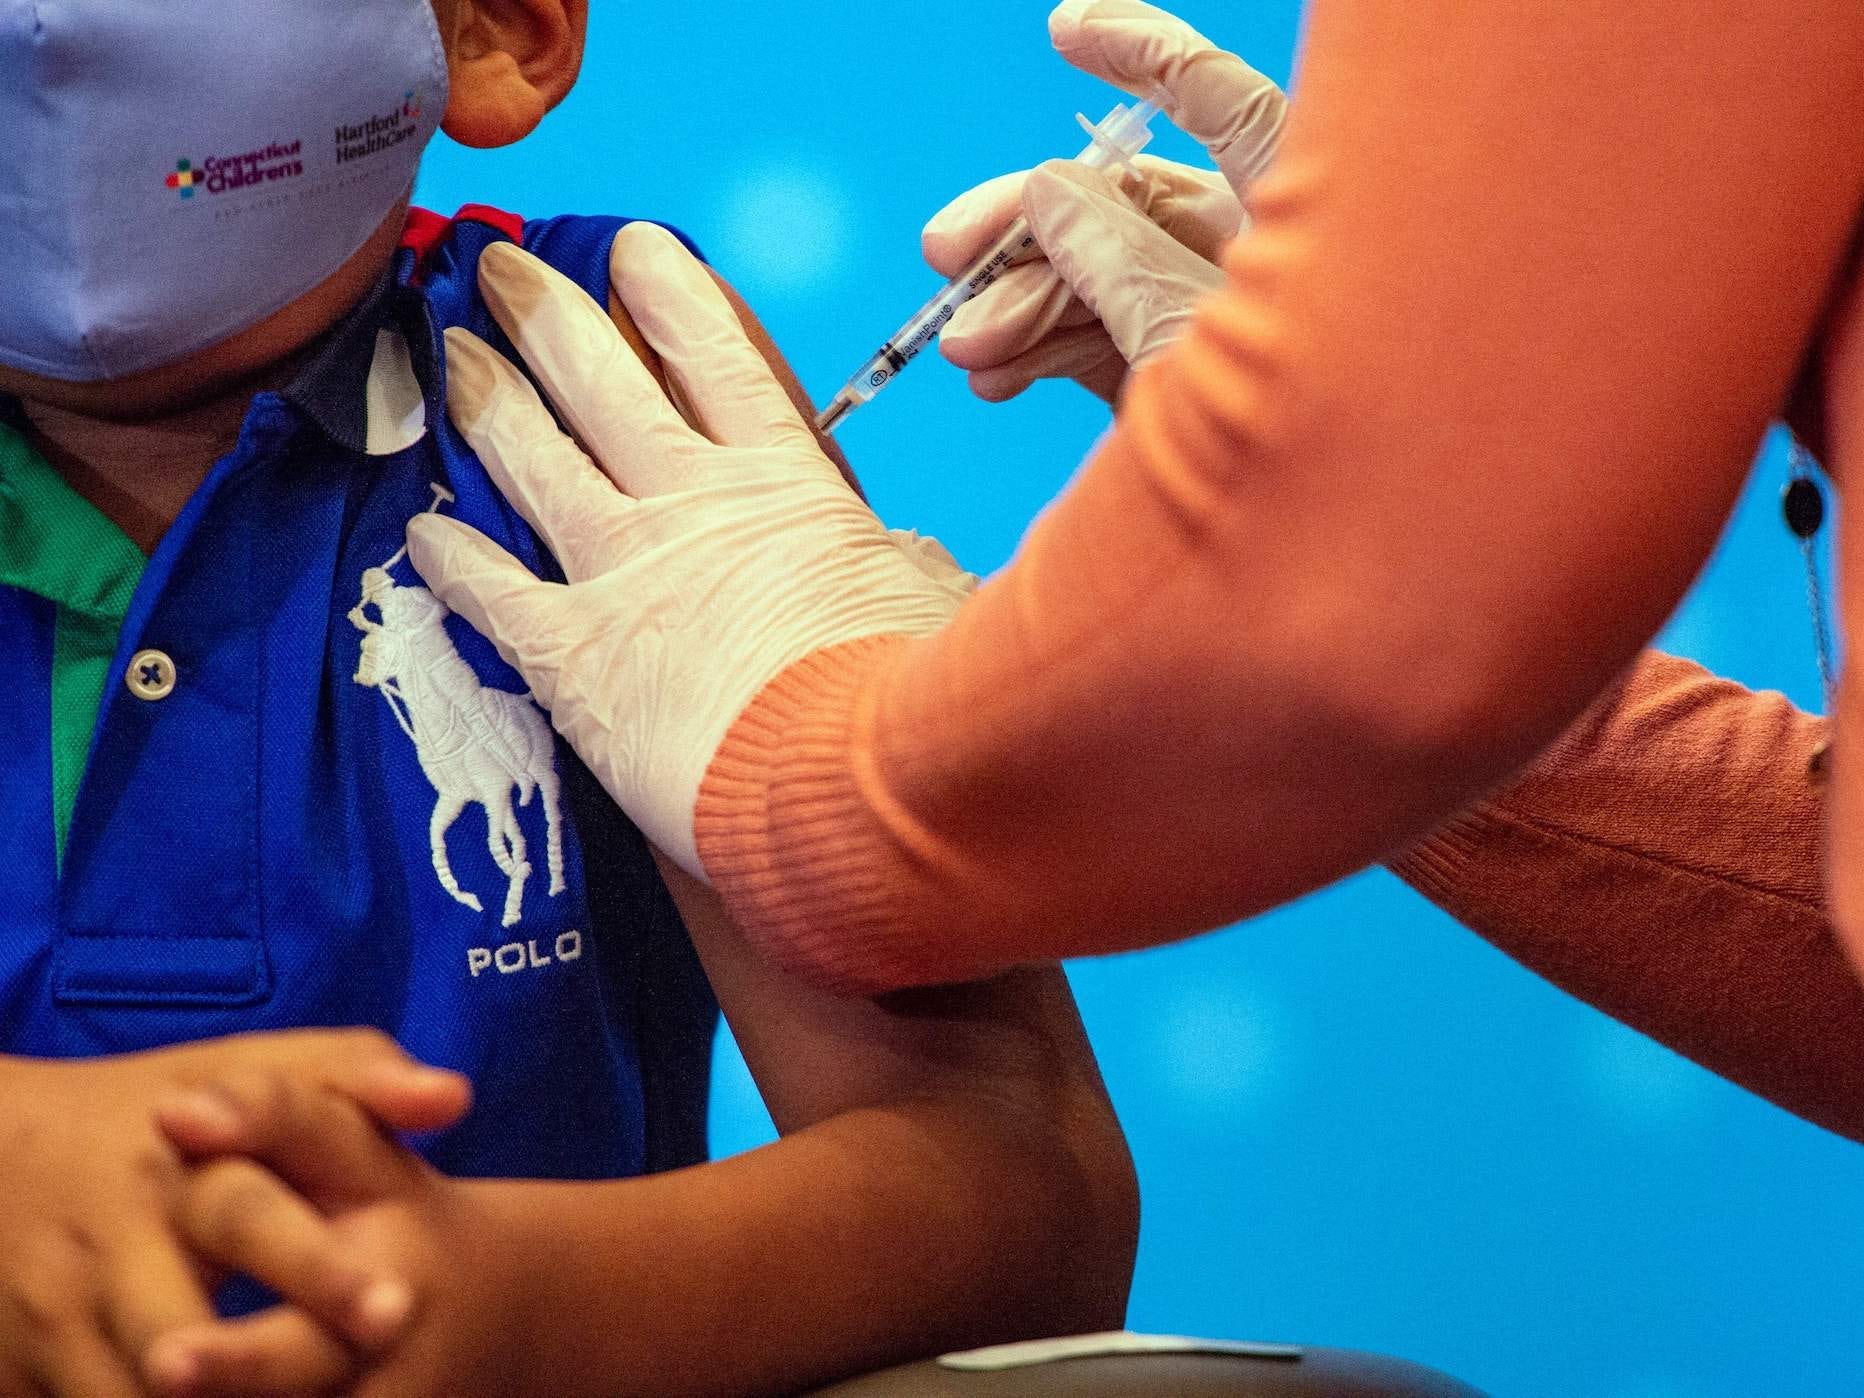 a chlid's arm getting injected with pfizer's covid-19 vaccine